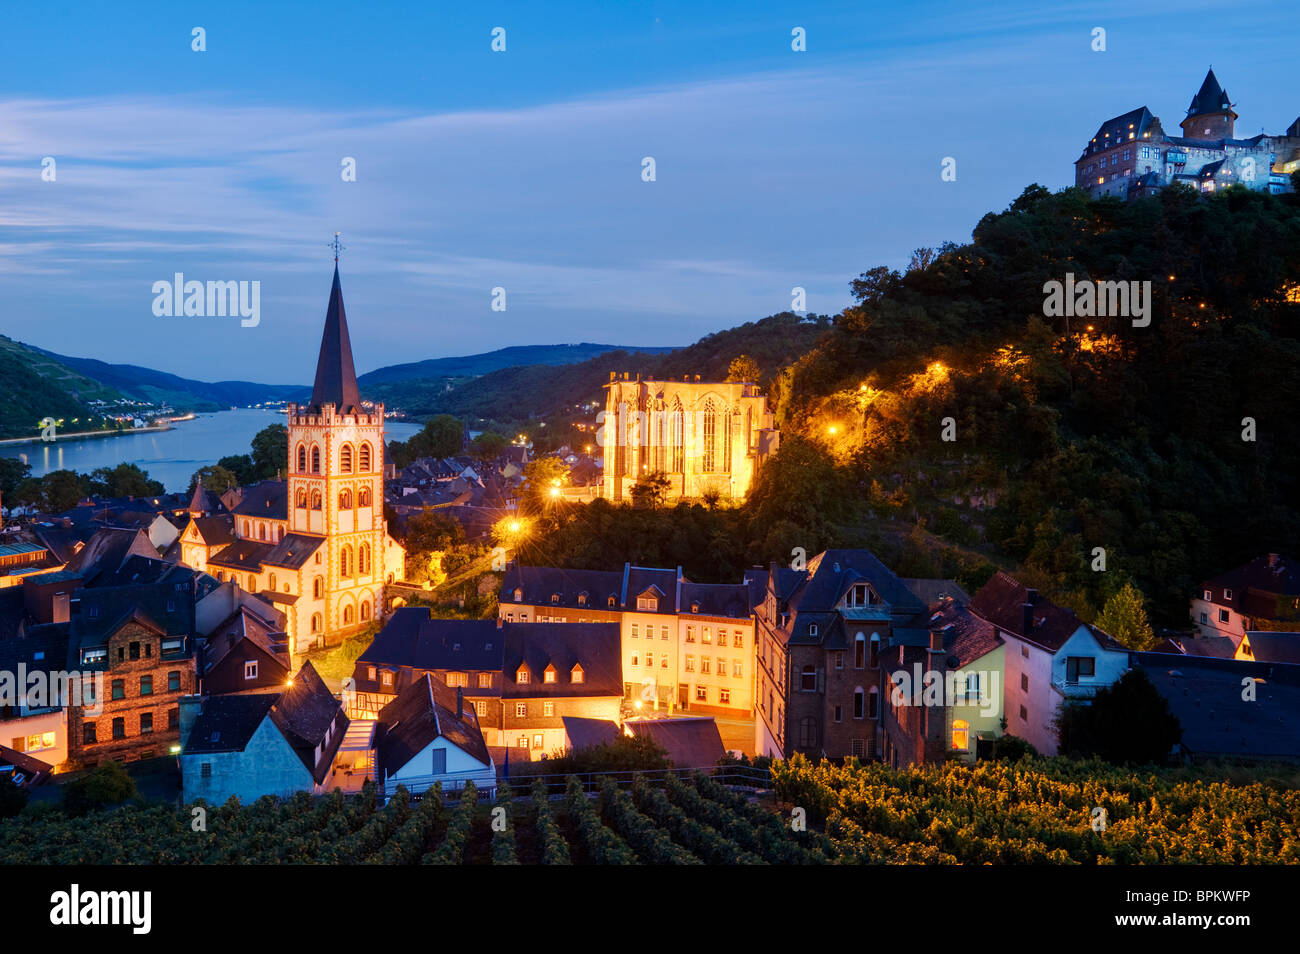 View of Bacharach, with St. Peter's Church, Werner Chapel and Burg Stahleck Castle, Rhineland-Palatinate, Germany Stock Photo